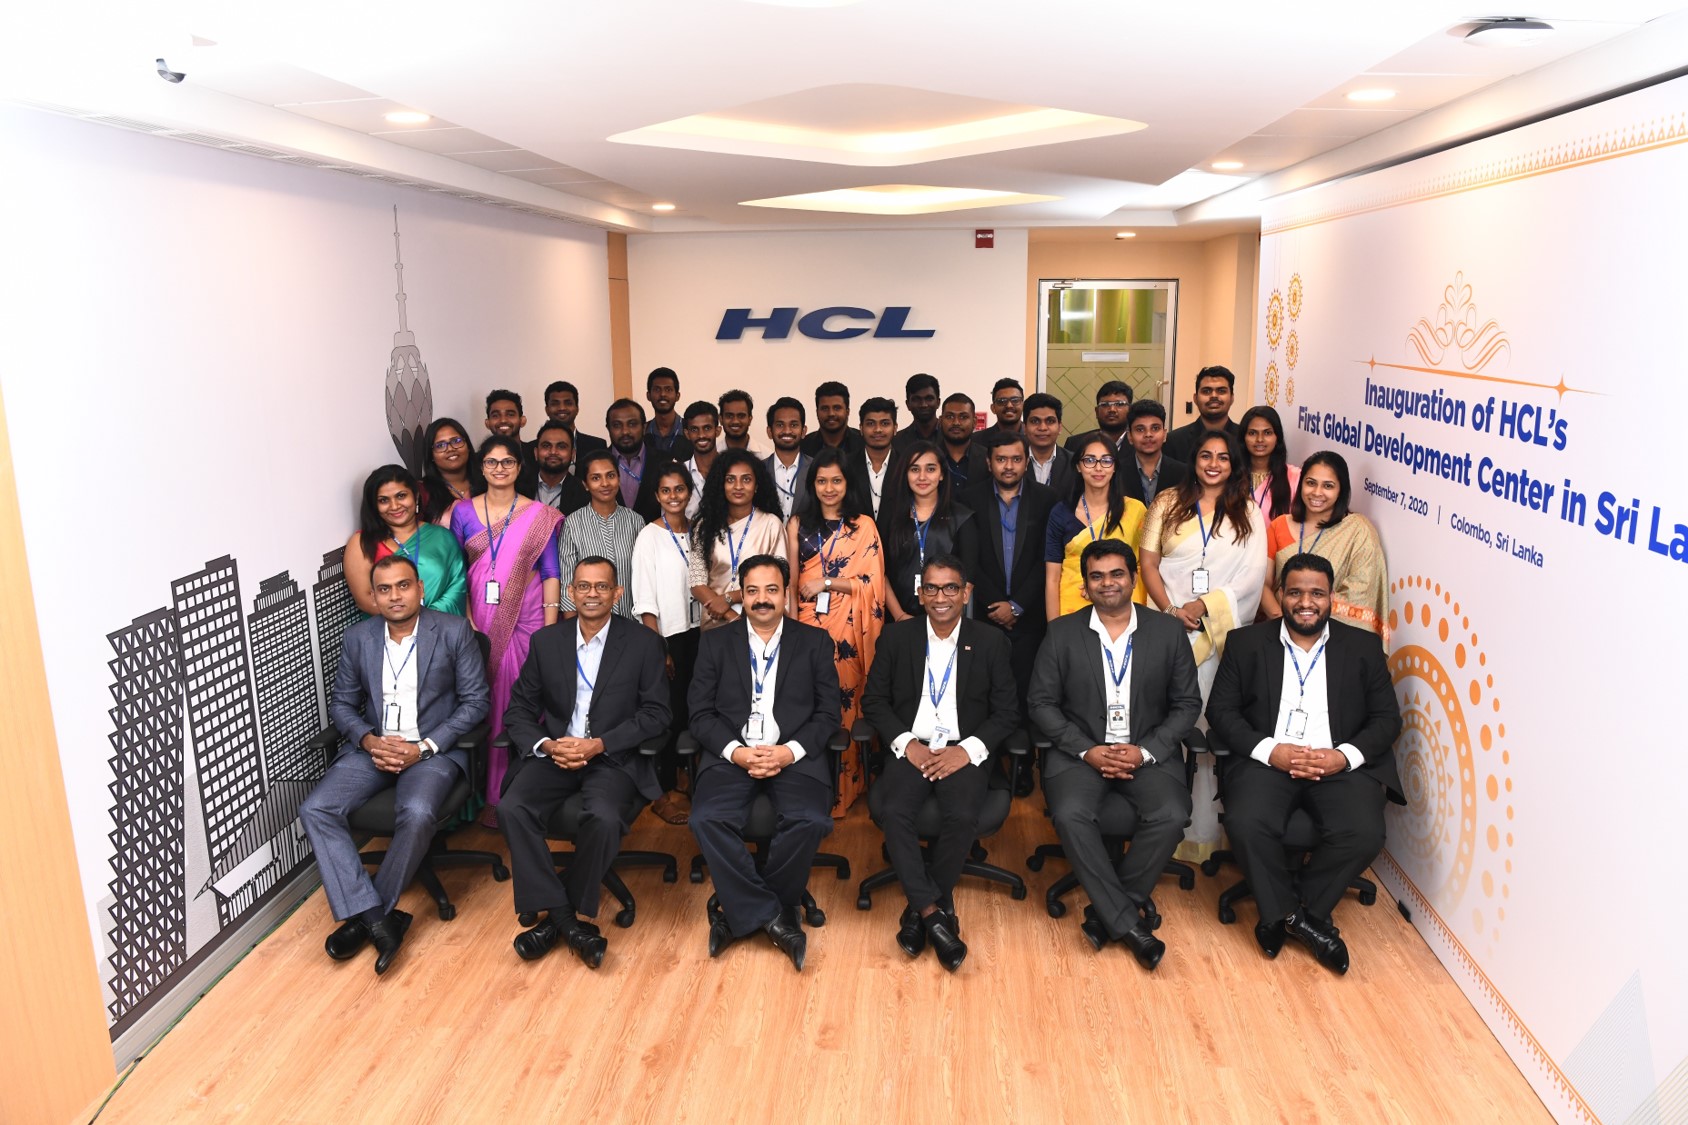 hcl-technologies-inaugurates-its-first-global-development-centre-in-colombo-sri-lanka